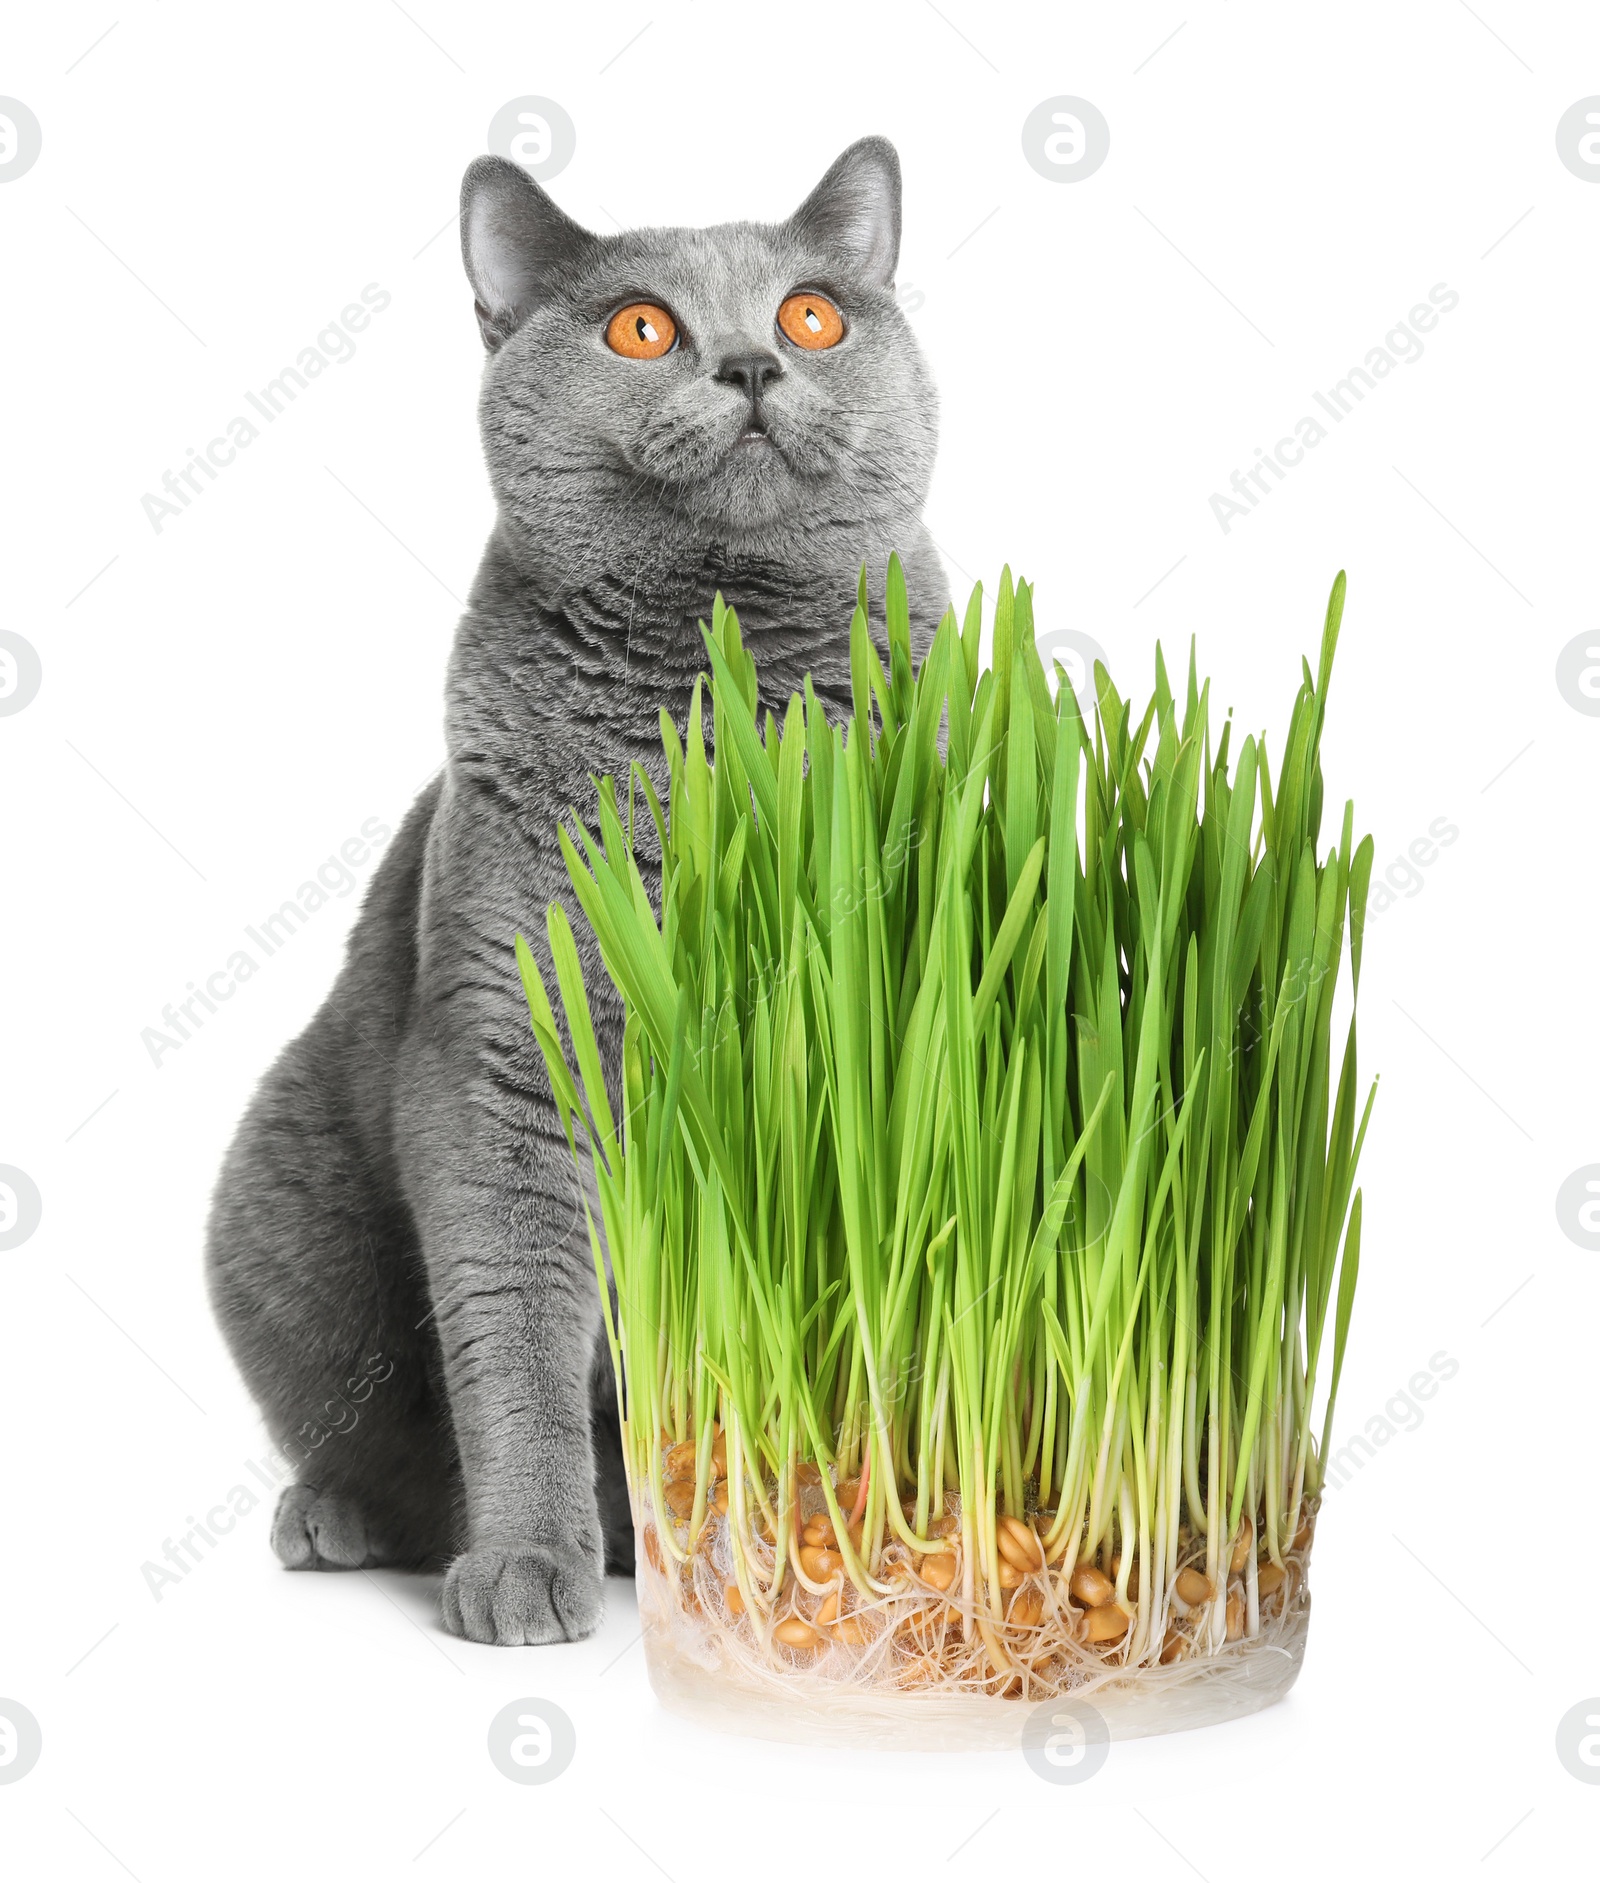 Image of Adorable cat and fresh green grass on white background